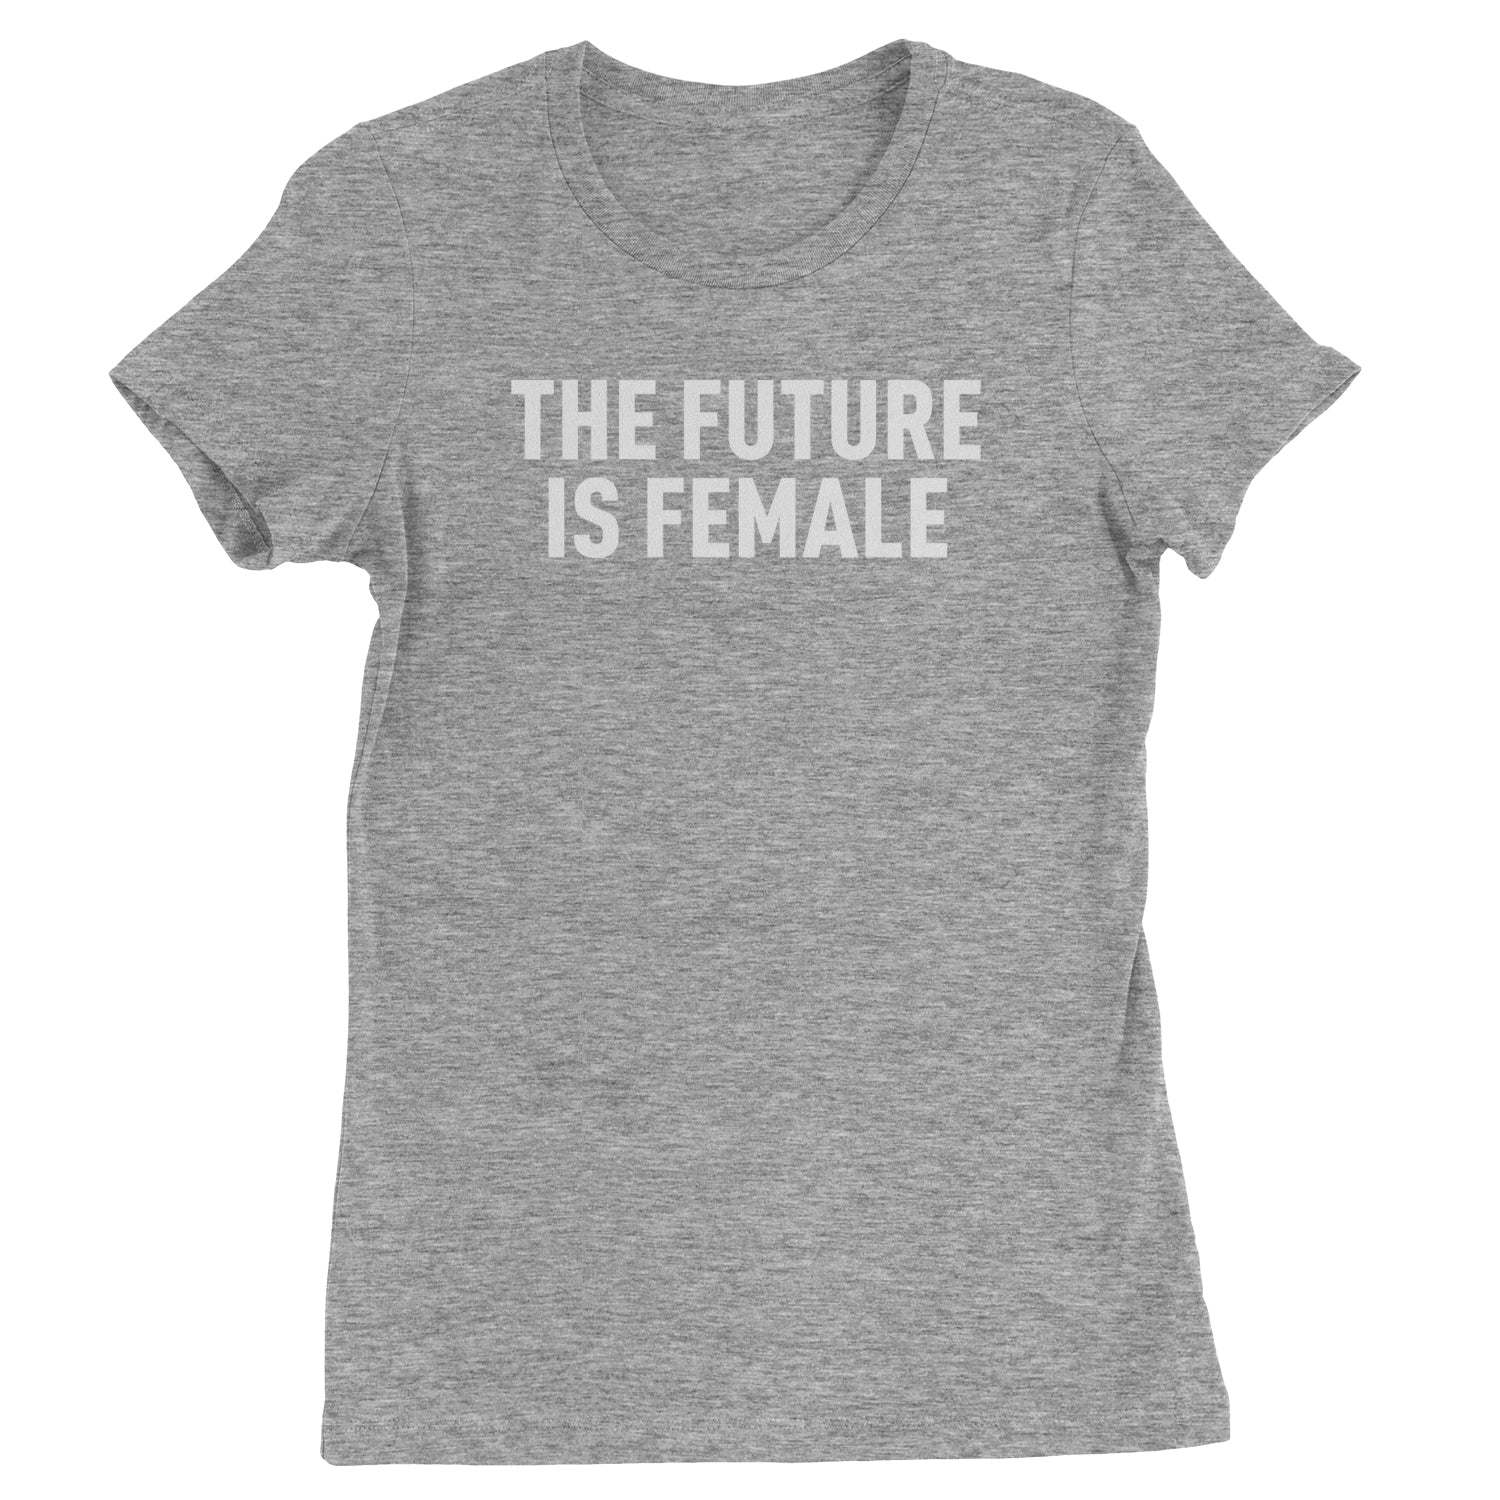 The Future Is Female Feminism Womens T-shirt female, feminism, feminist, femme, future, is, liberation, suffrage, the by Expression Tees